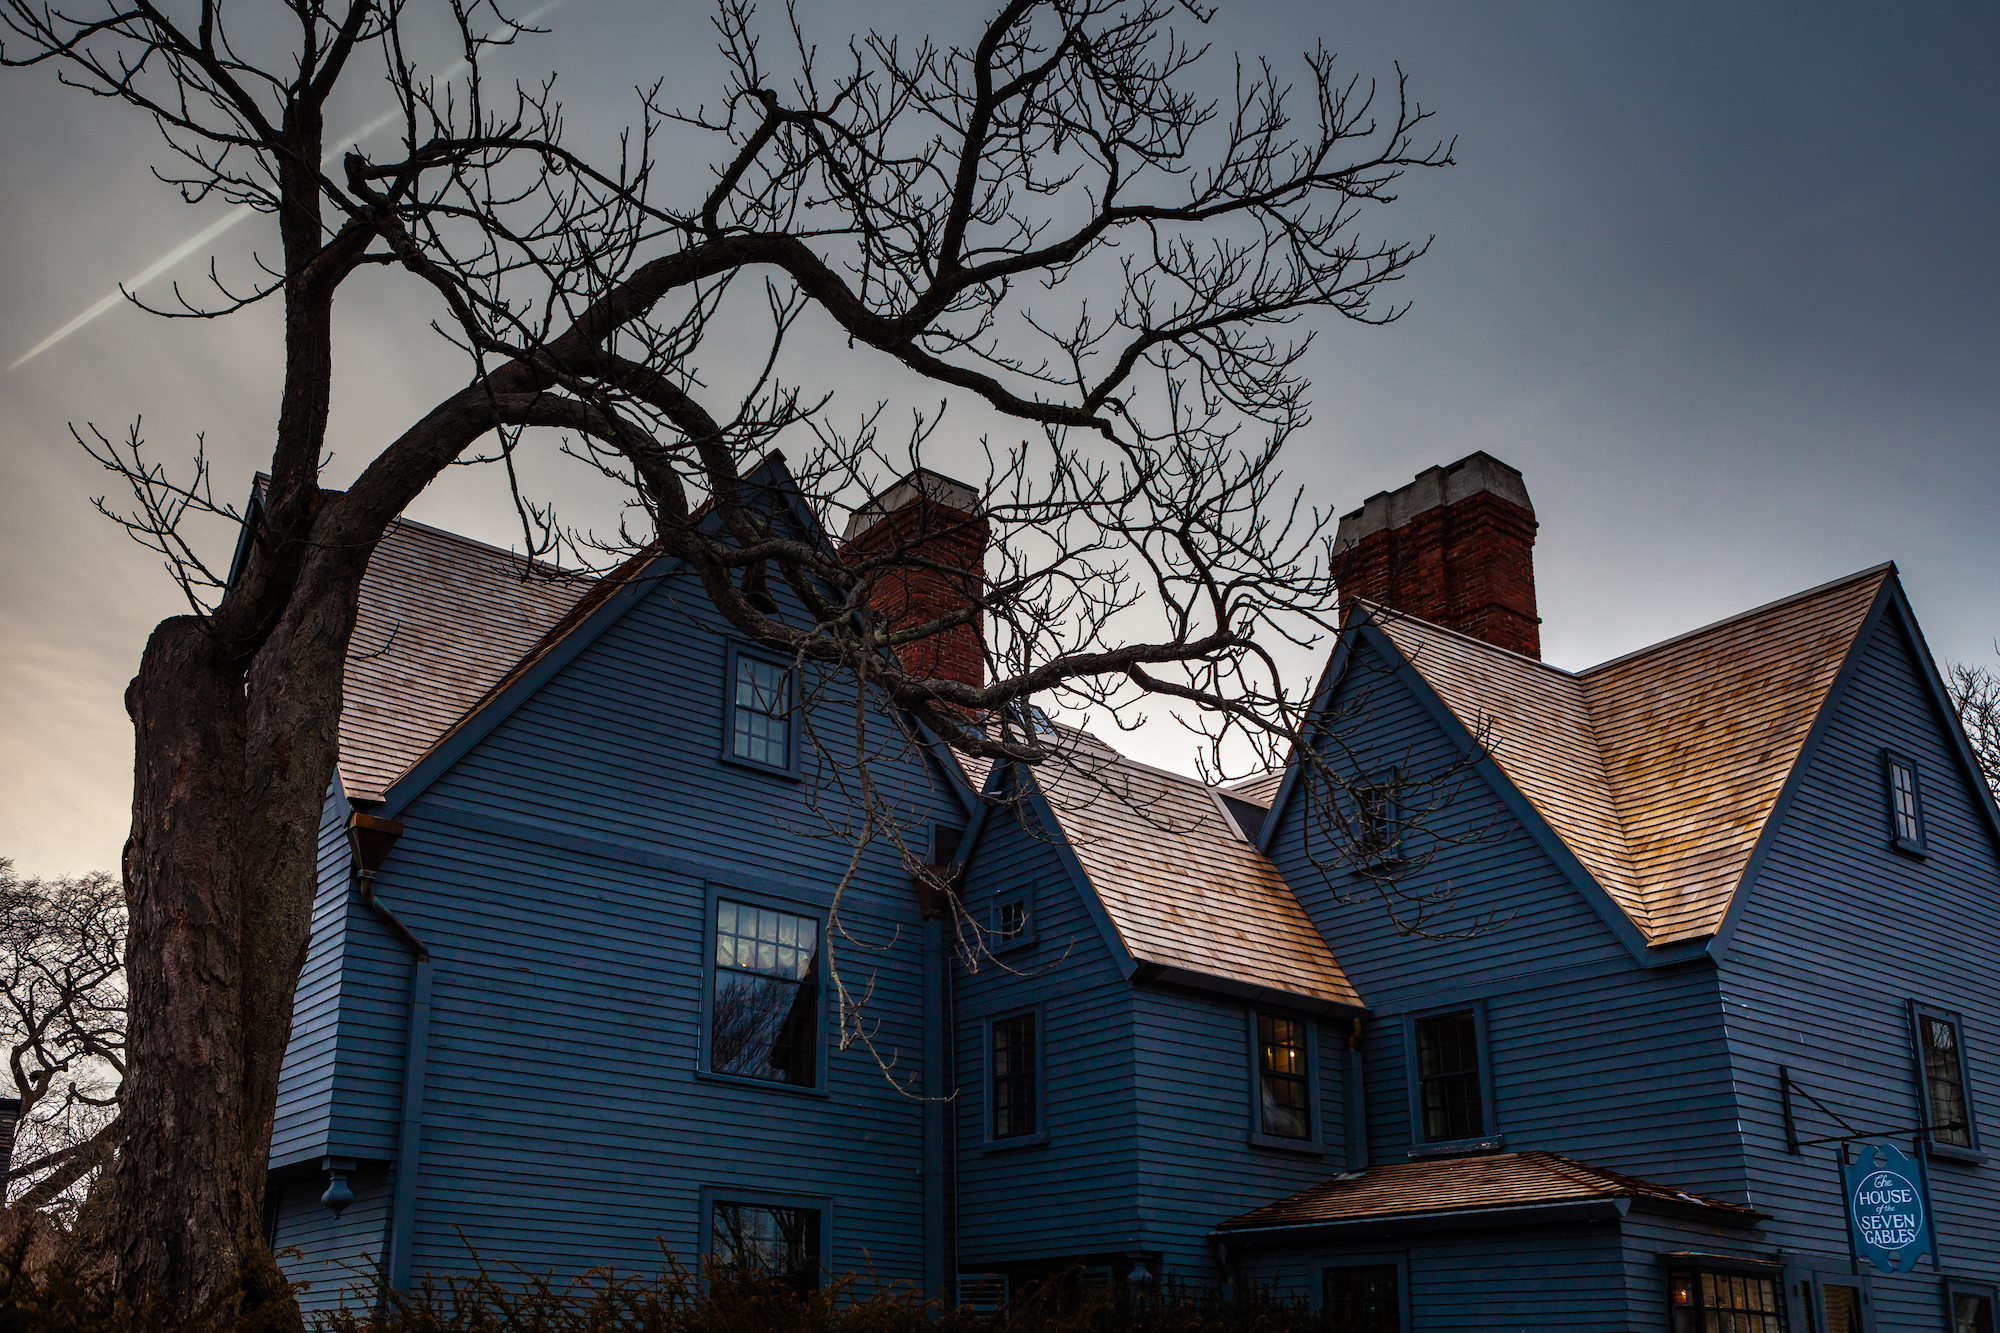 Senatet købmand Accor 21 Most Haunted Houses in the US That Will Give You the Creeps